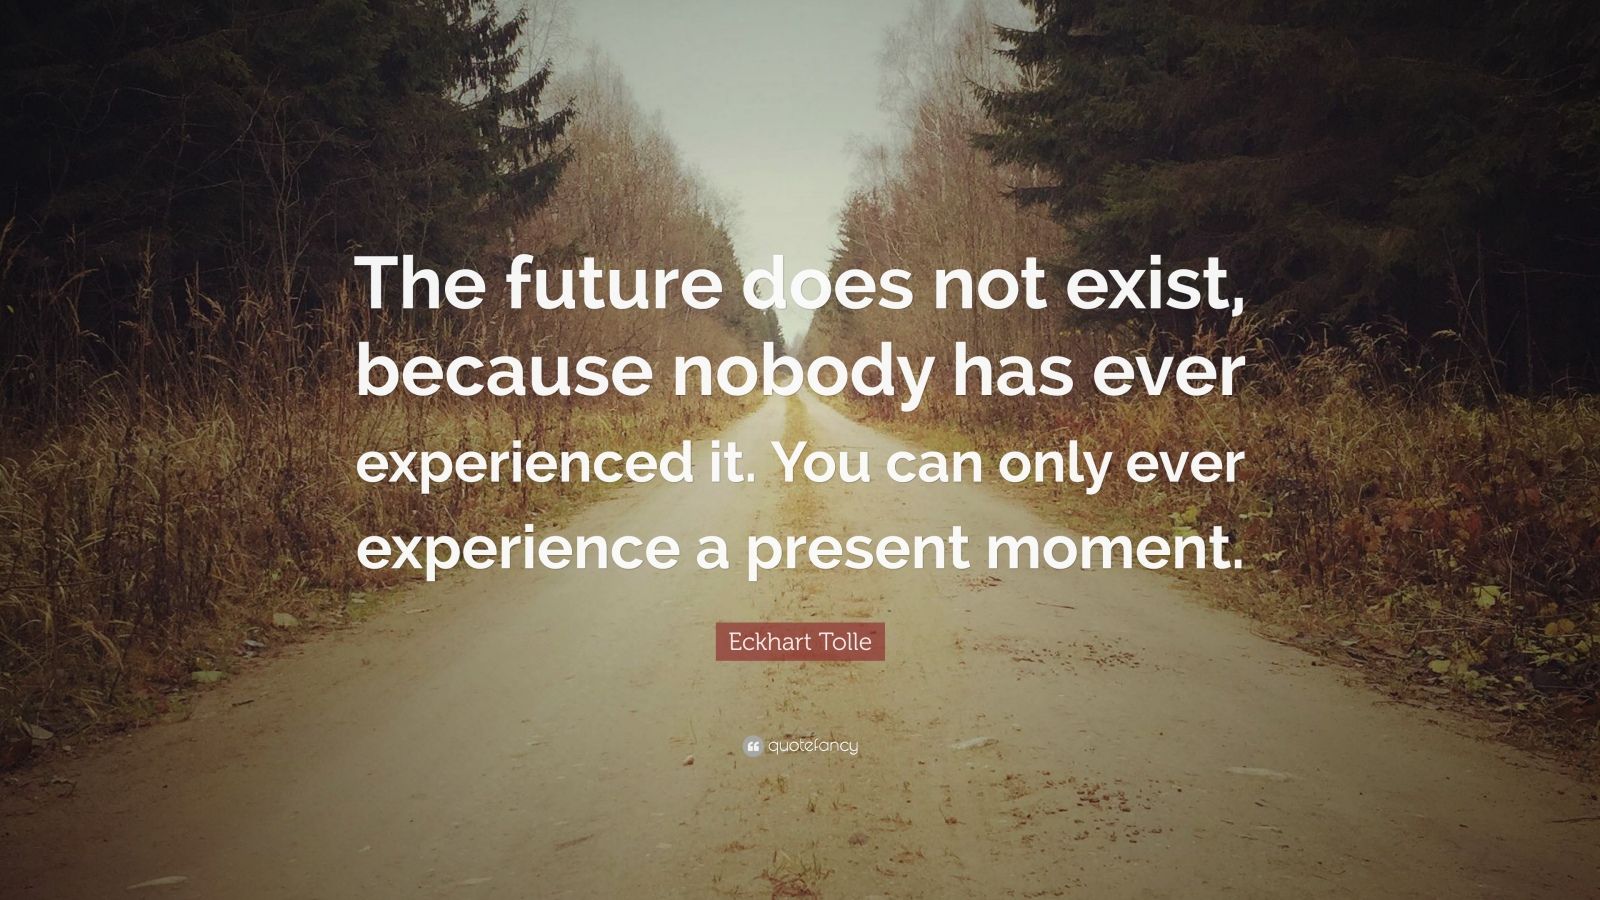 Eckhart Tolle Quote: “The future does not exist, because nobody has